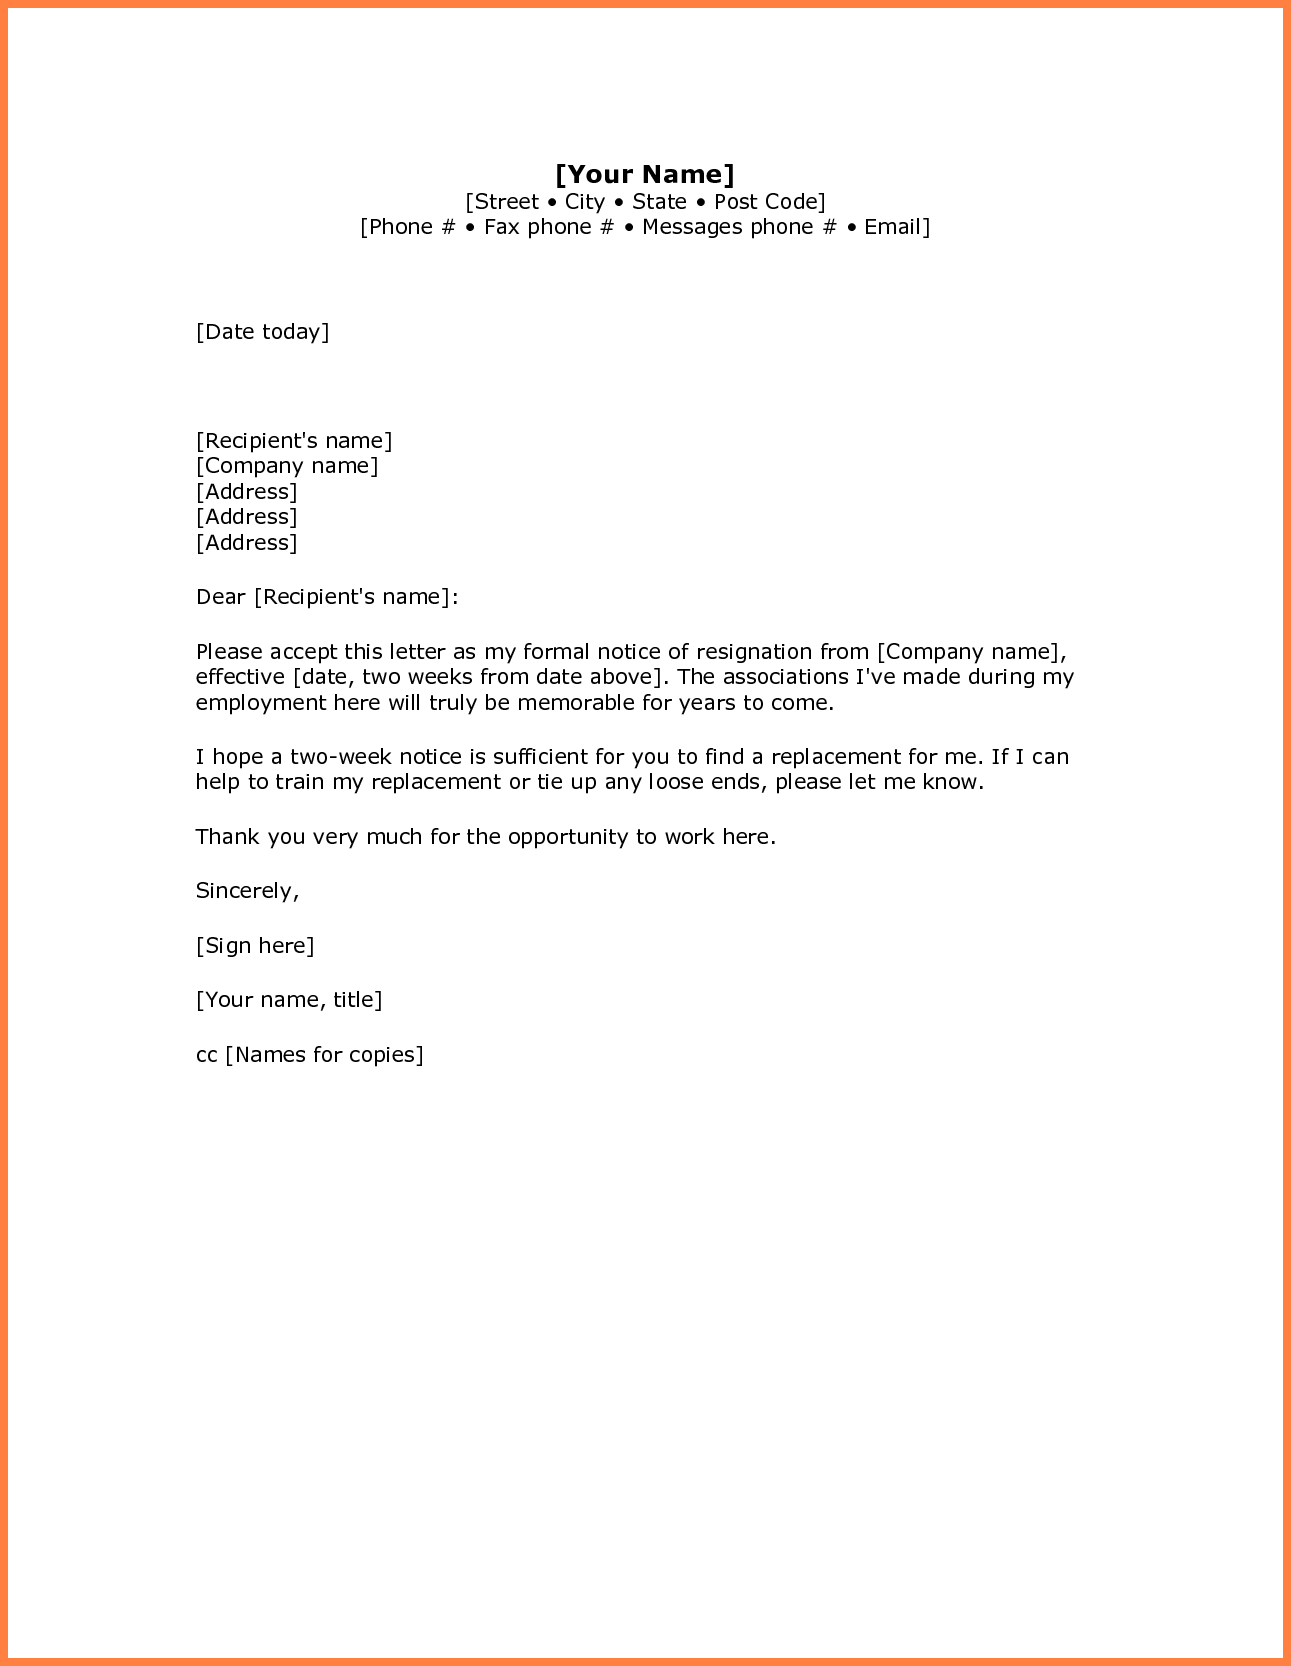 5 Simple Resignation Letter Sample 1 Week Notice intended for size 1291 X 1666